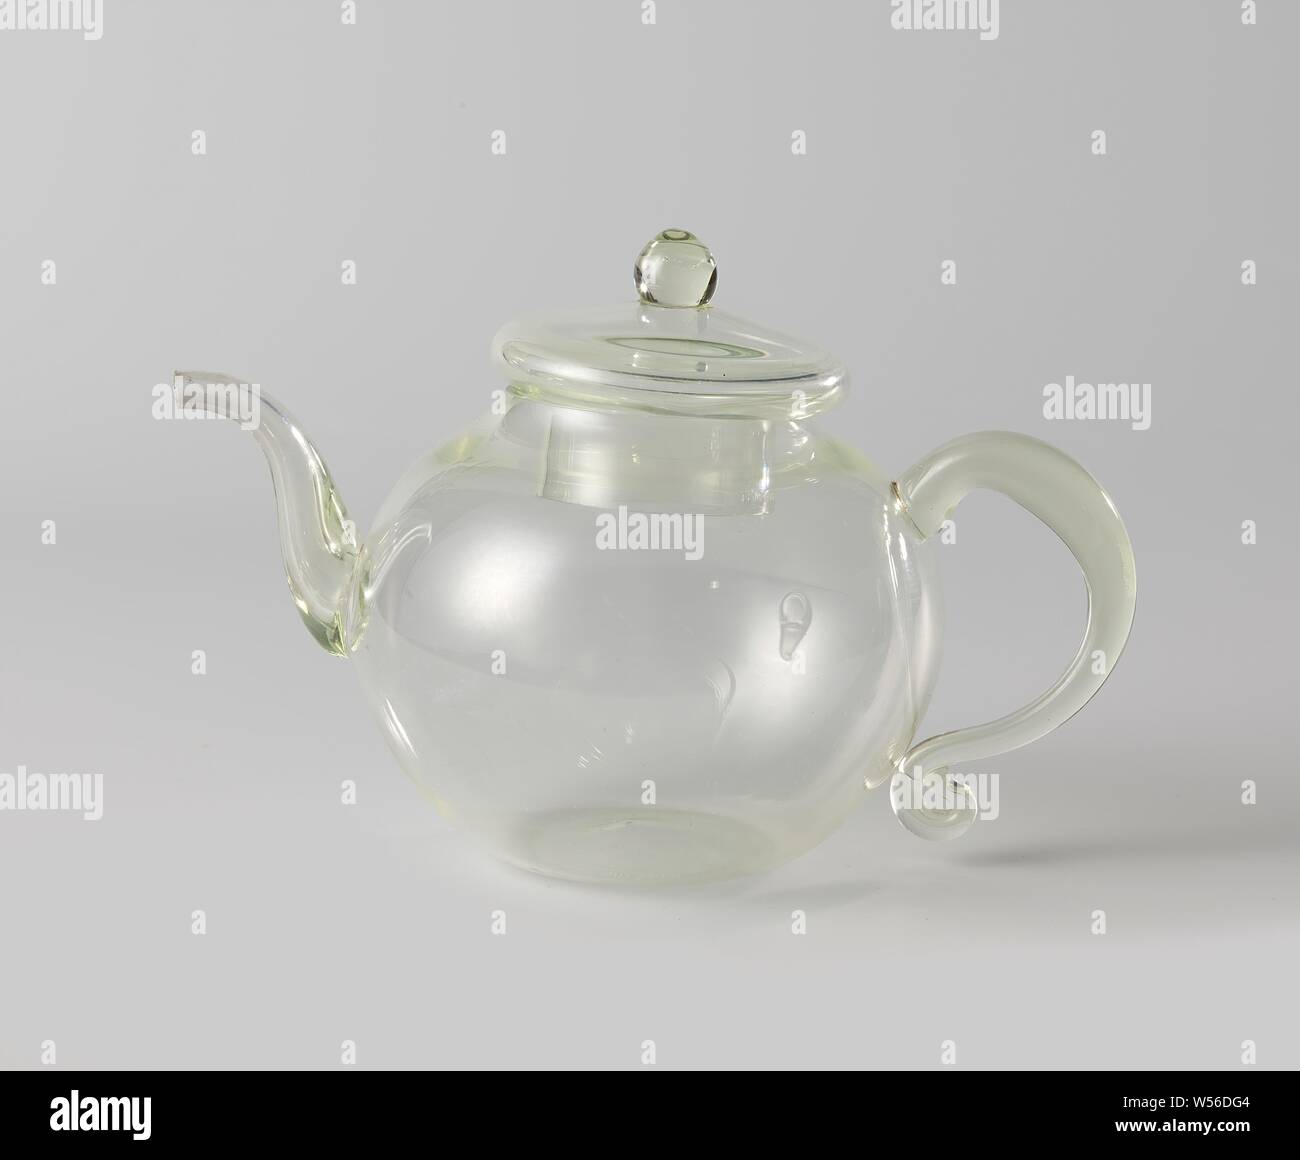 Teapot, spherical body, curved spout and c-shaped handle., anonymous, c. 1750 - c. 1800, glass, glassblowing, h 8.6 cm d 10.3 cm × w 16.5 cm Stock Photo